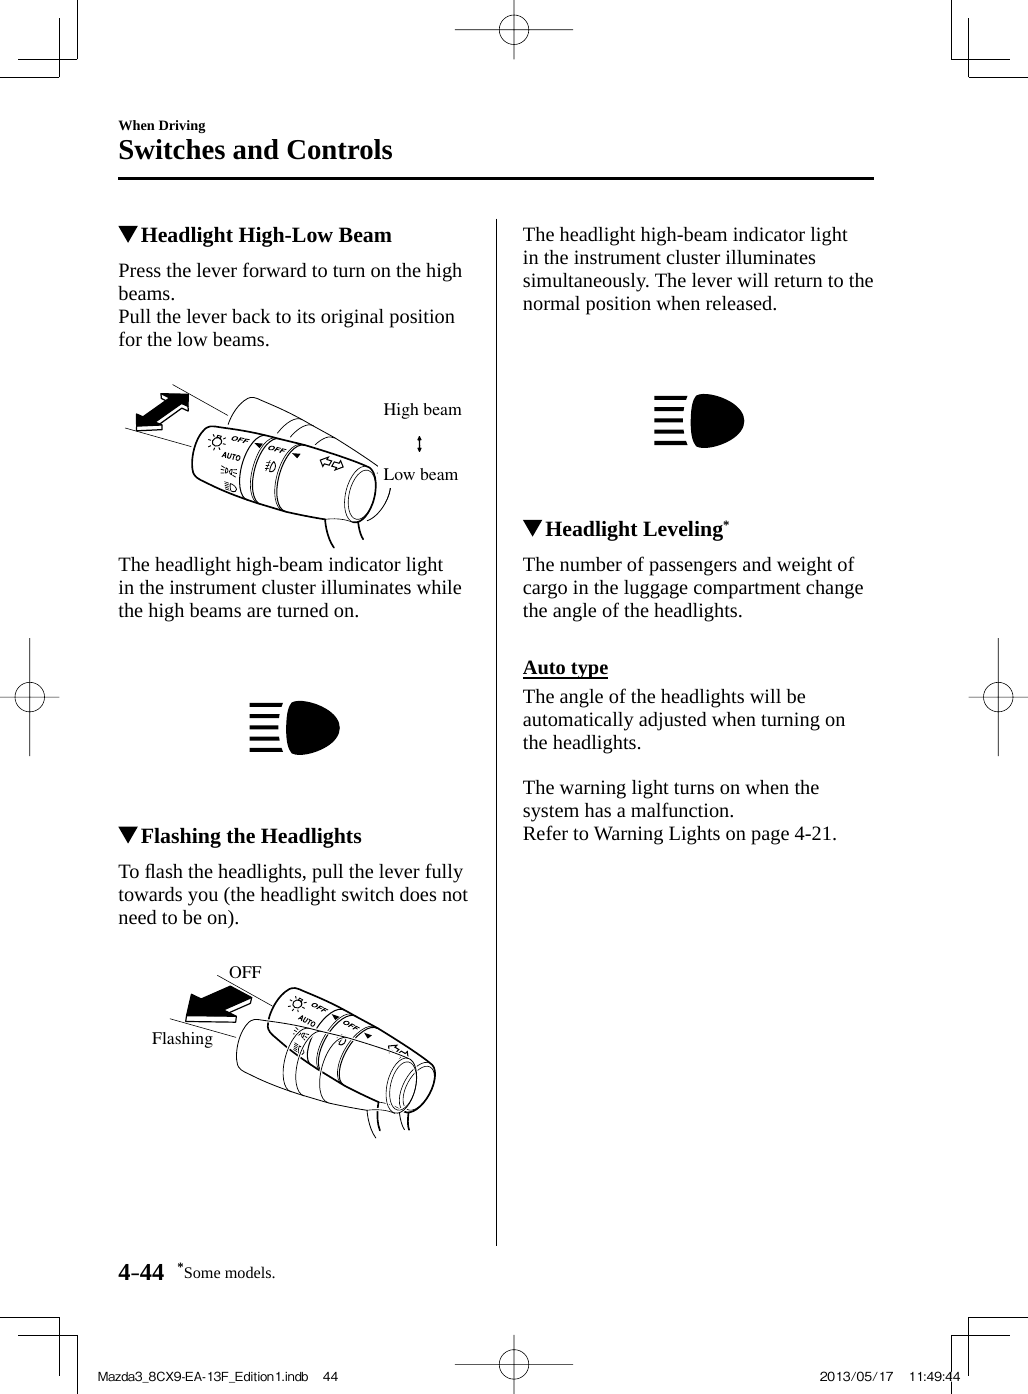 *Some models.4–44When DrivingSwitches and Controls          Headlight High-Low Beam            Press  the  lever  forward  to  turn  on  the  high beams.  Pull the lever back to its original position for the low beams.   High beamLow beam   The headlight high-beam indicator light in the instrument cluster illuminates while the high beams are turned on.              Flashing the Headlights            T o   ﬂ ash the headlights, pull the lever fully towards you (the headlight switch does not need to be on).   OFFFlashing   The headlight high-beam indicator light in the instrument cluster illuminates simultaneously. The lever will return to the normal position when released.              Headlight Leveling *             The  number  of  passengers  and  weight  of cargo in the luggage compartment change the angle of the headlights.    Auto  type    The angle of the headlights will be automatically adjusted when turning on the headlights.    The warning light turns on when the system has a malfunction.  Refer to Warning Lights on page  4-21 .Mazda3_8CX9-EA-13F_Edition1.indb   44Mazda3_8CX9-EA-13F_Edition1.indb   44 2013/05/17   11:49:442013/05/17   11:49:44